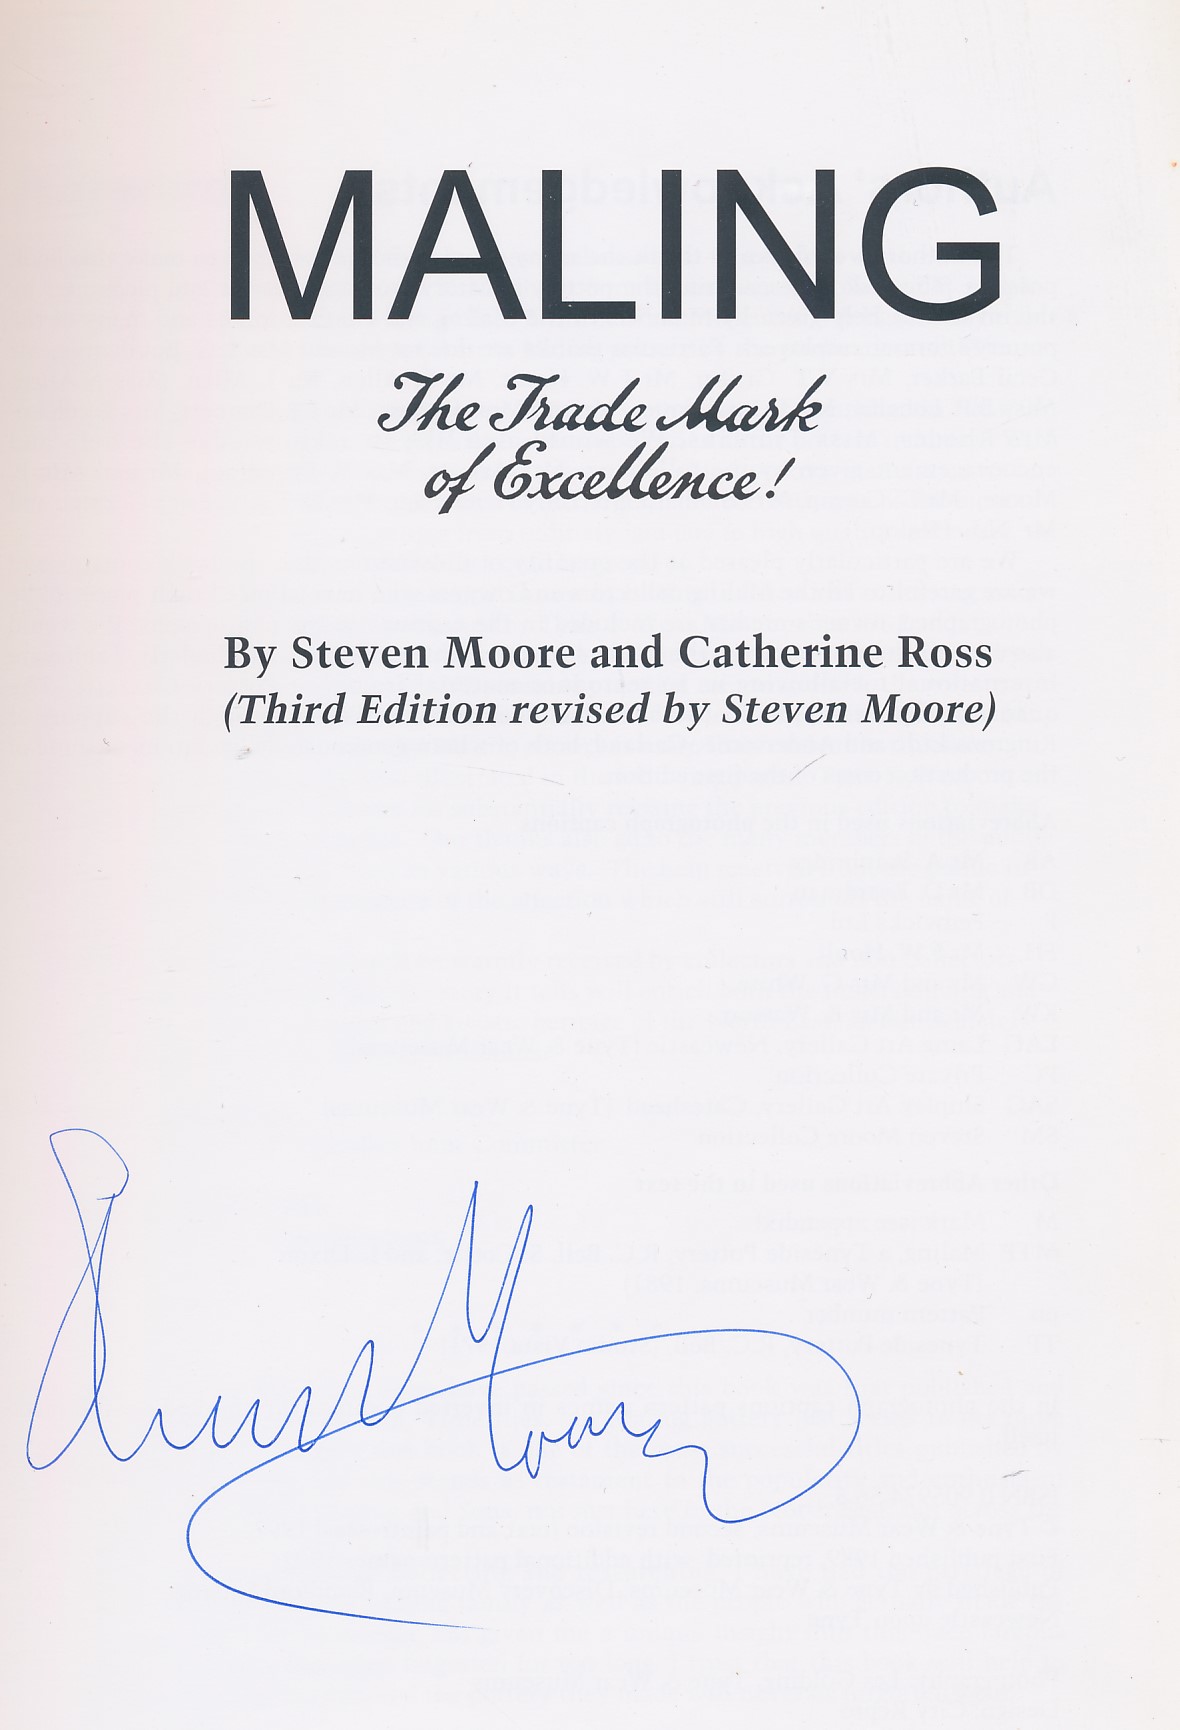 Maling. The Trade Mark of Excellence. Signed copy